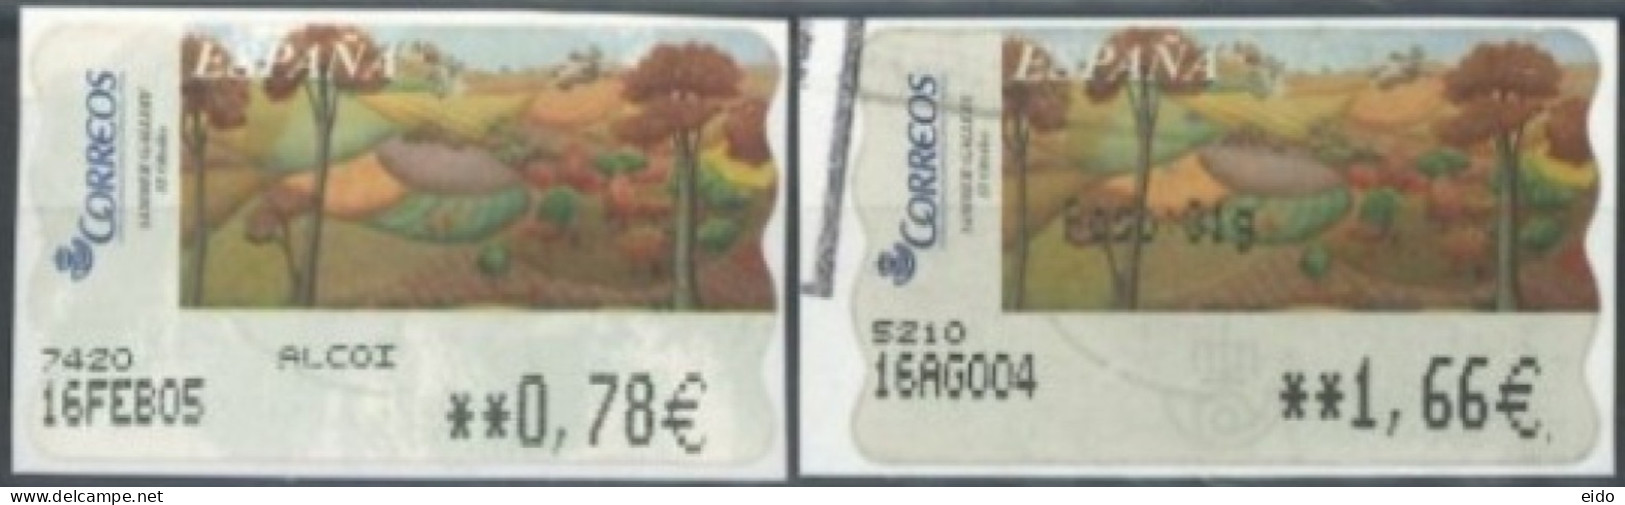 SPAIN - 2004/05 -  SAMER GALLERY, VERANO STAMPS LABELS SET OF 2 OF DIFFERENT VALUES, USED . - Oblitérés